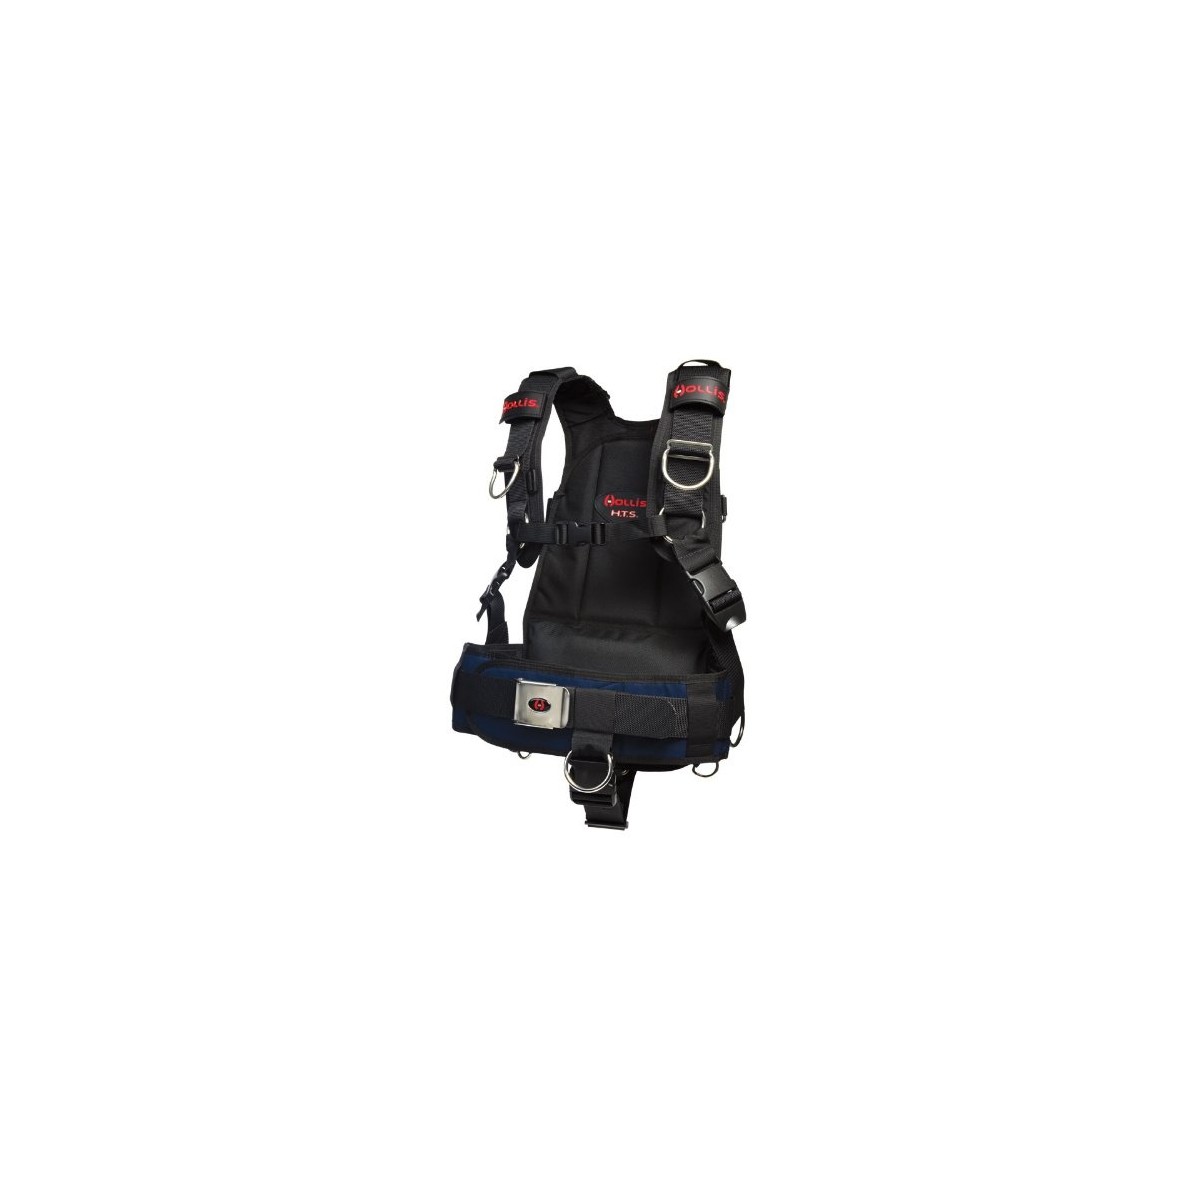 New Hollis HTS II Harness Technical System For Scuba Diving